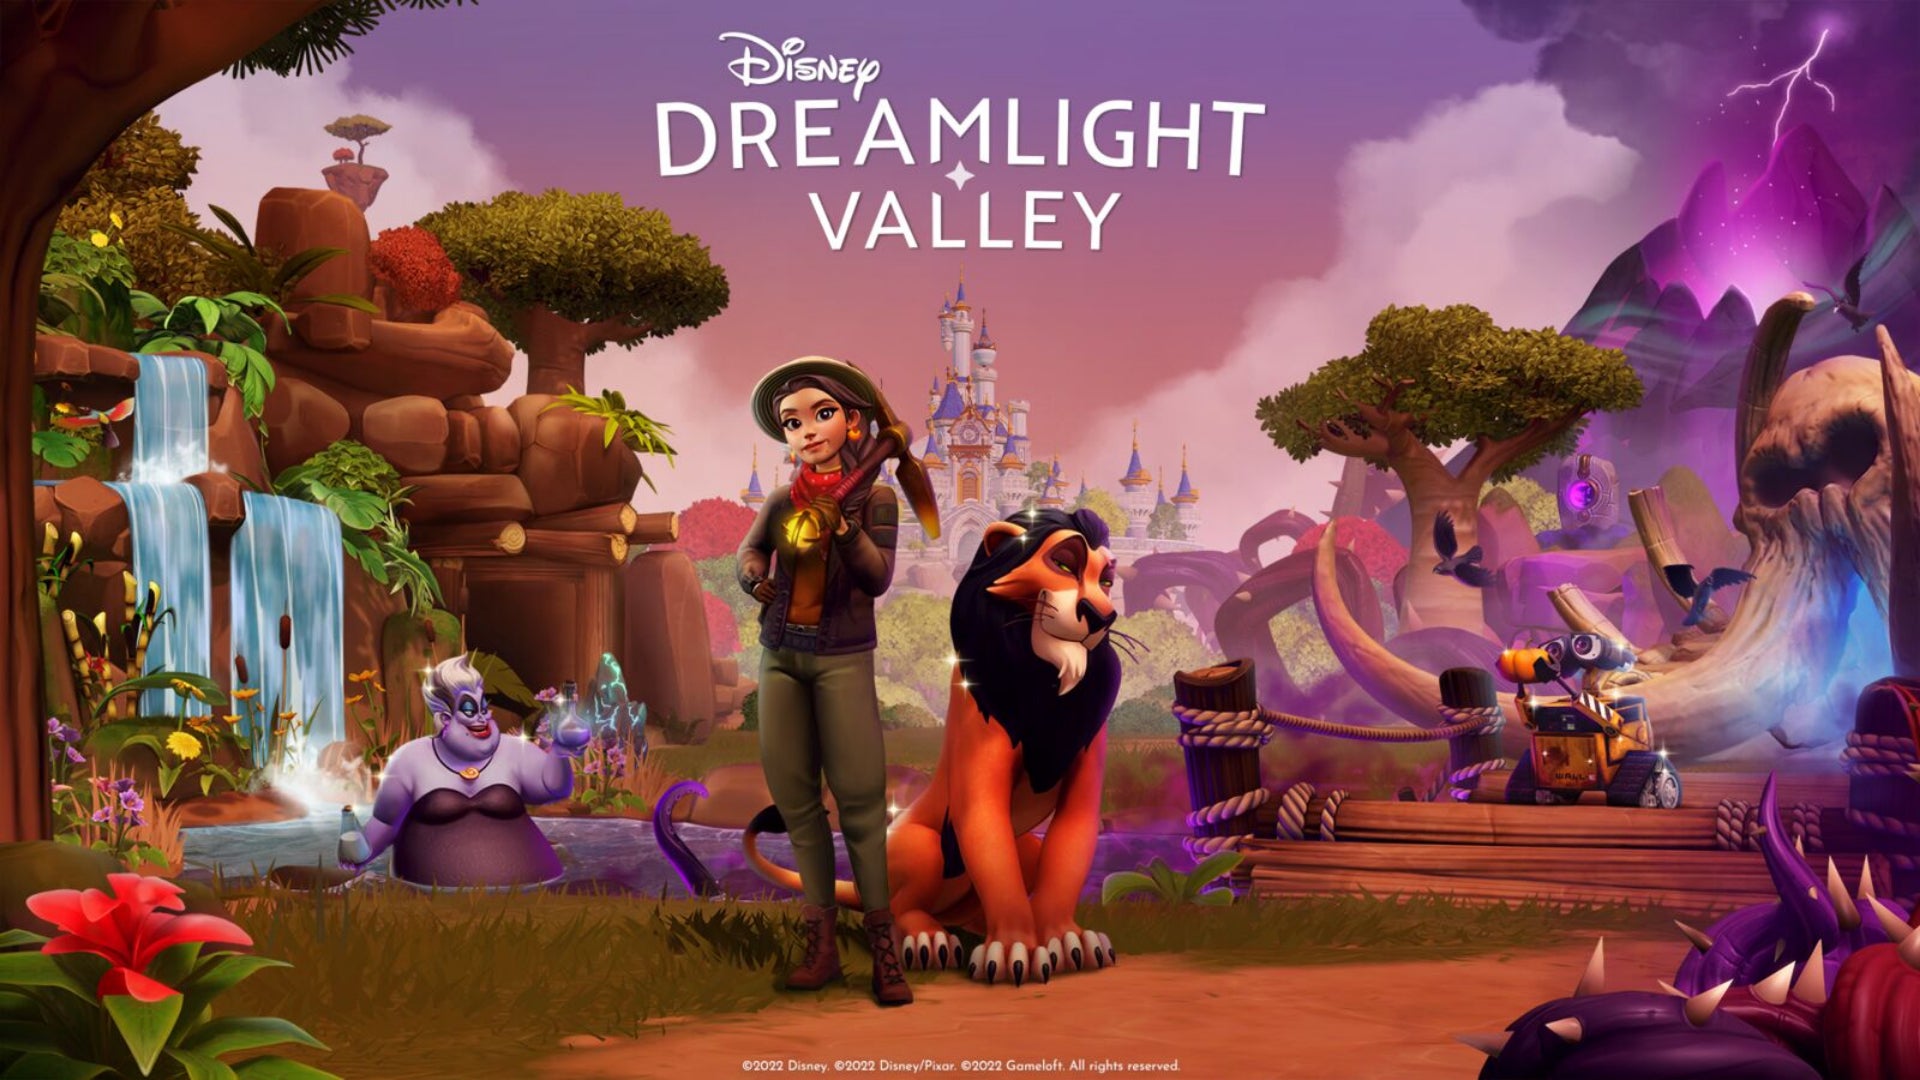 Disney Dreamlight Valley’s first free major content update, Scar’s